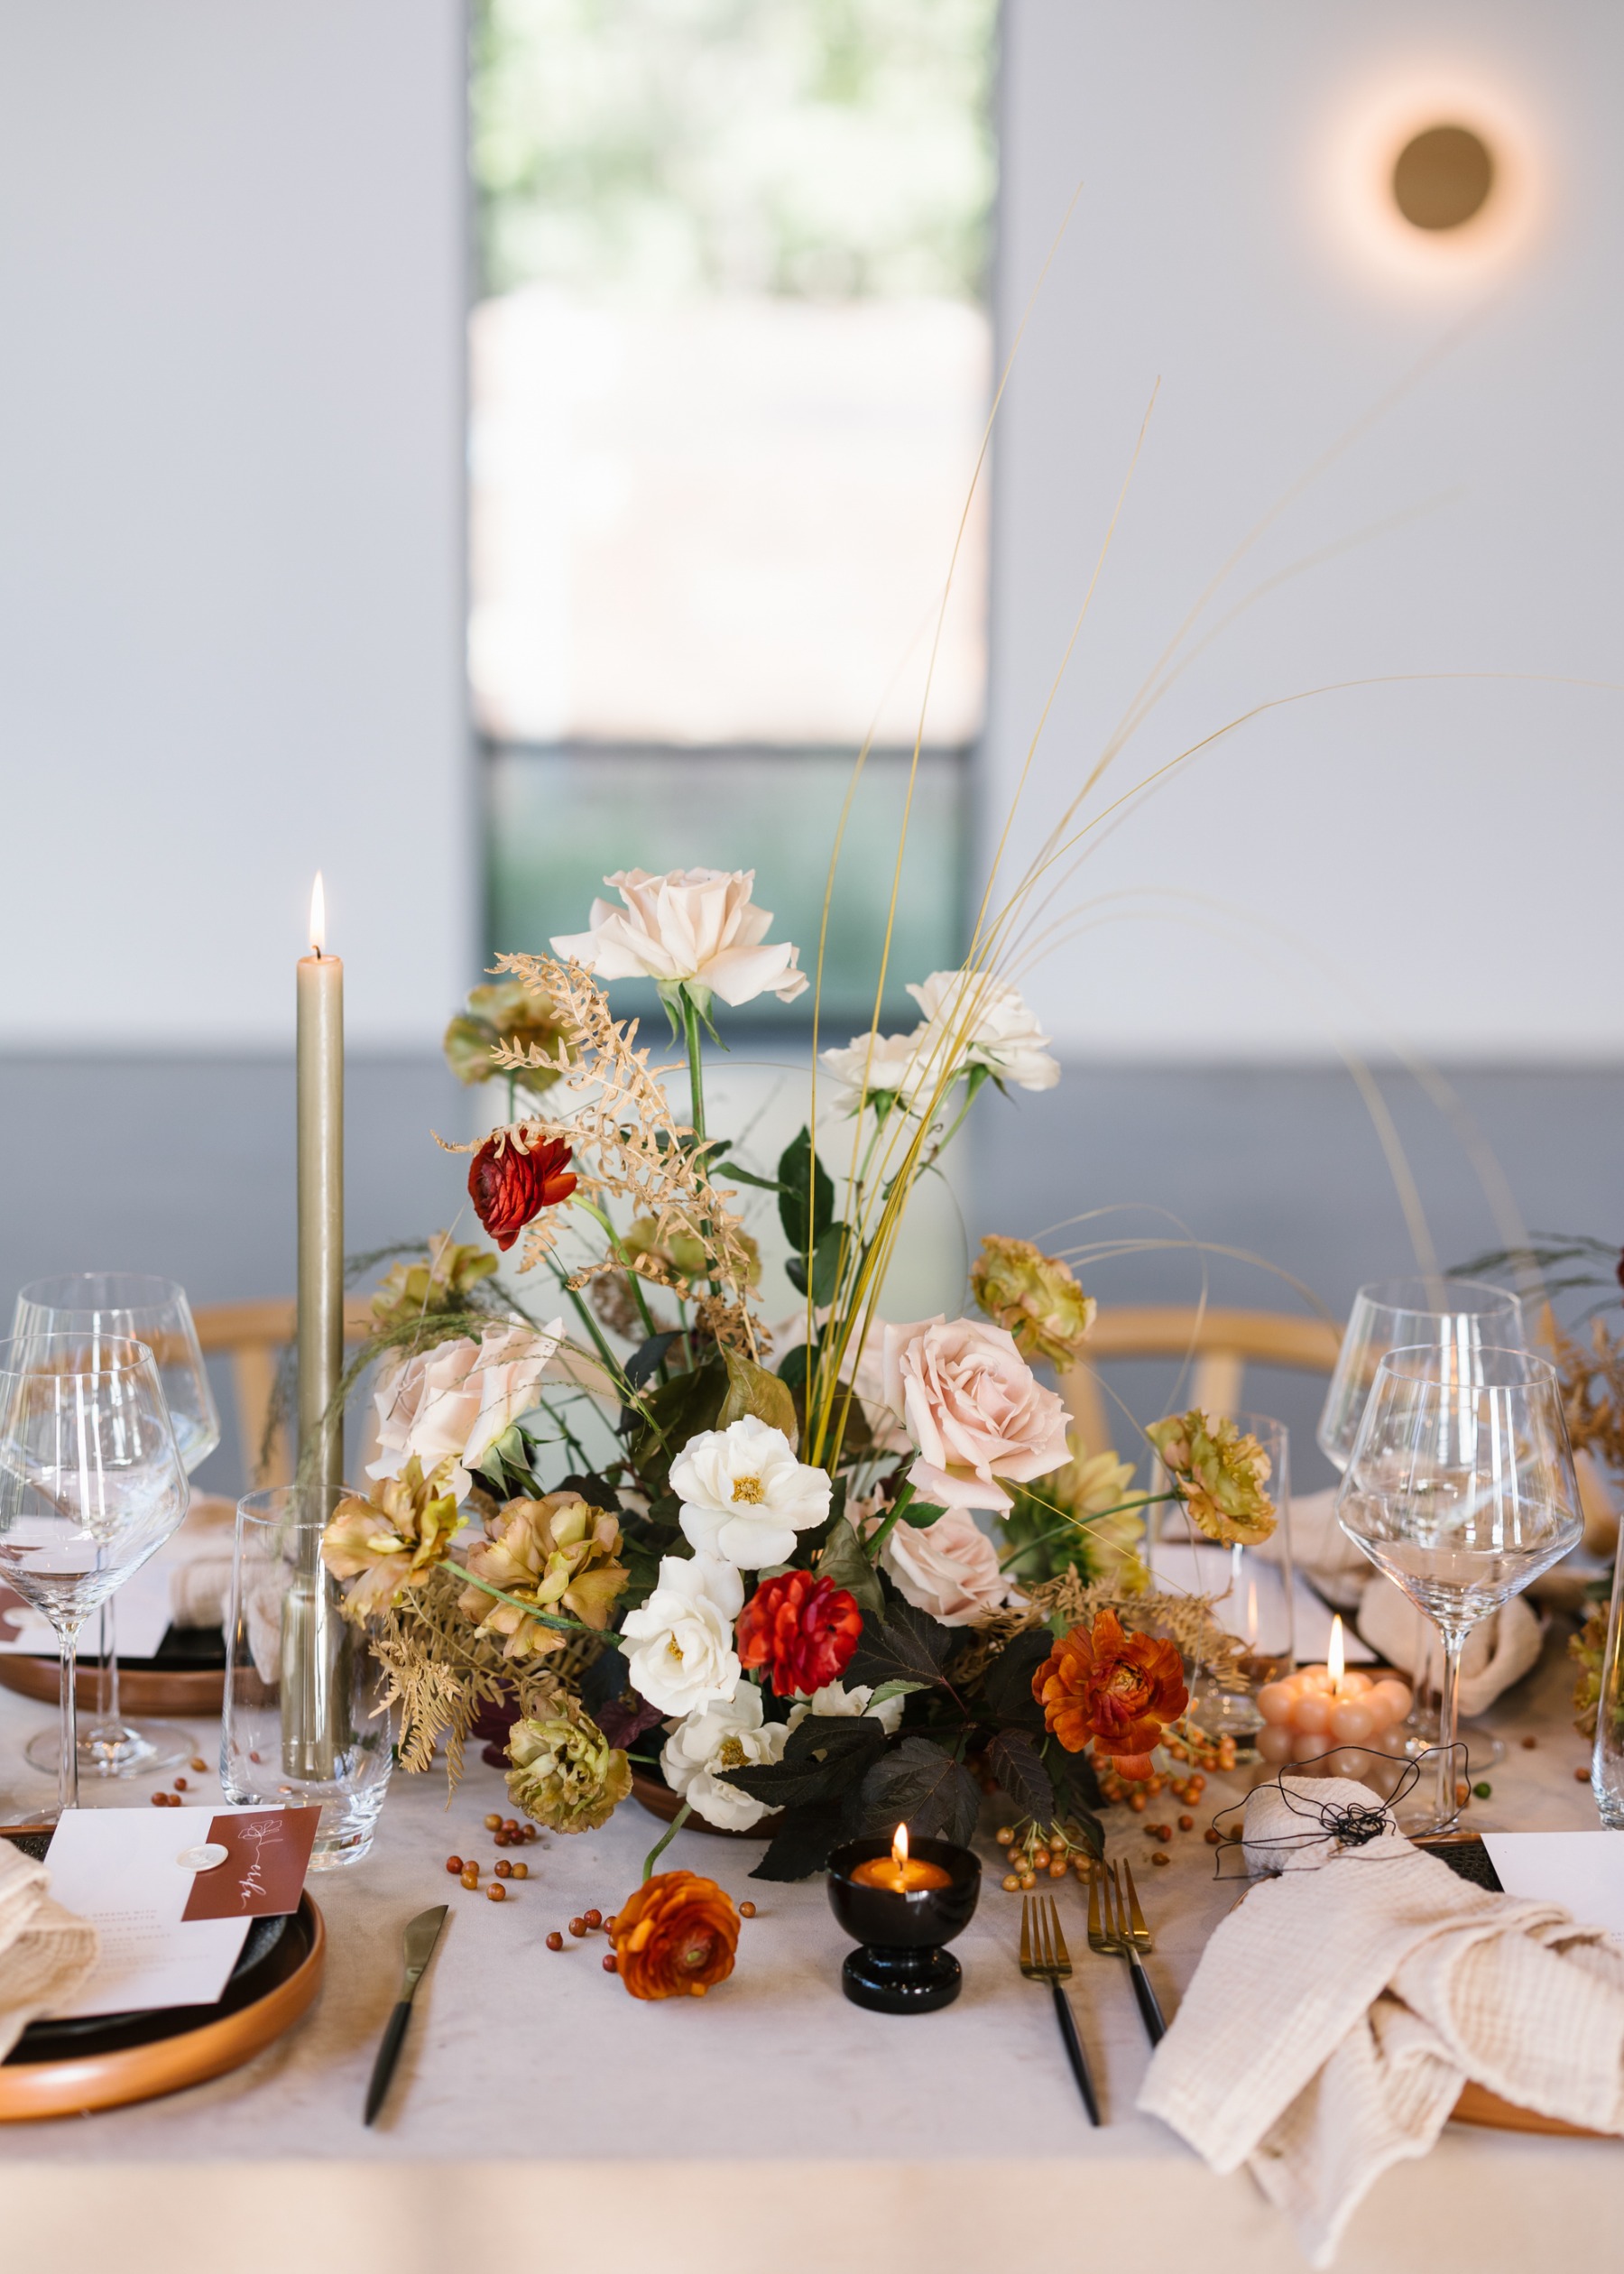 A fiery & sophisticated wedding inspiration with a moody palette!